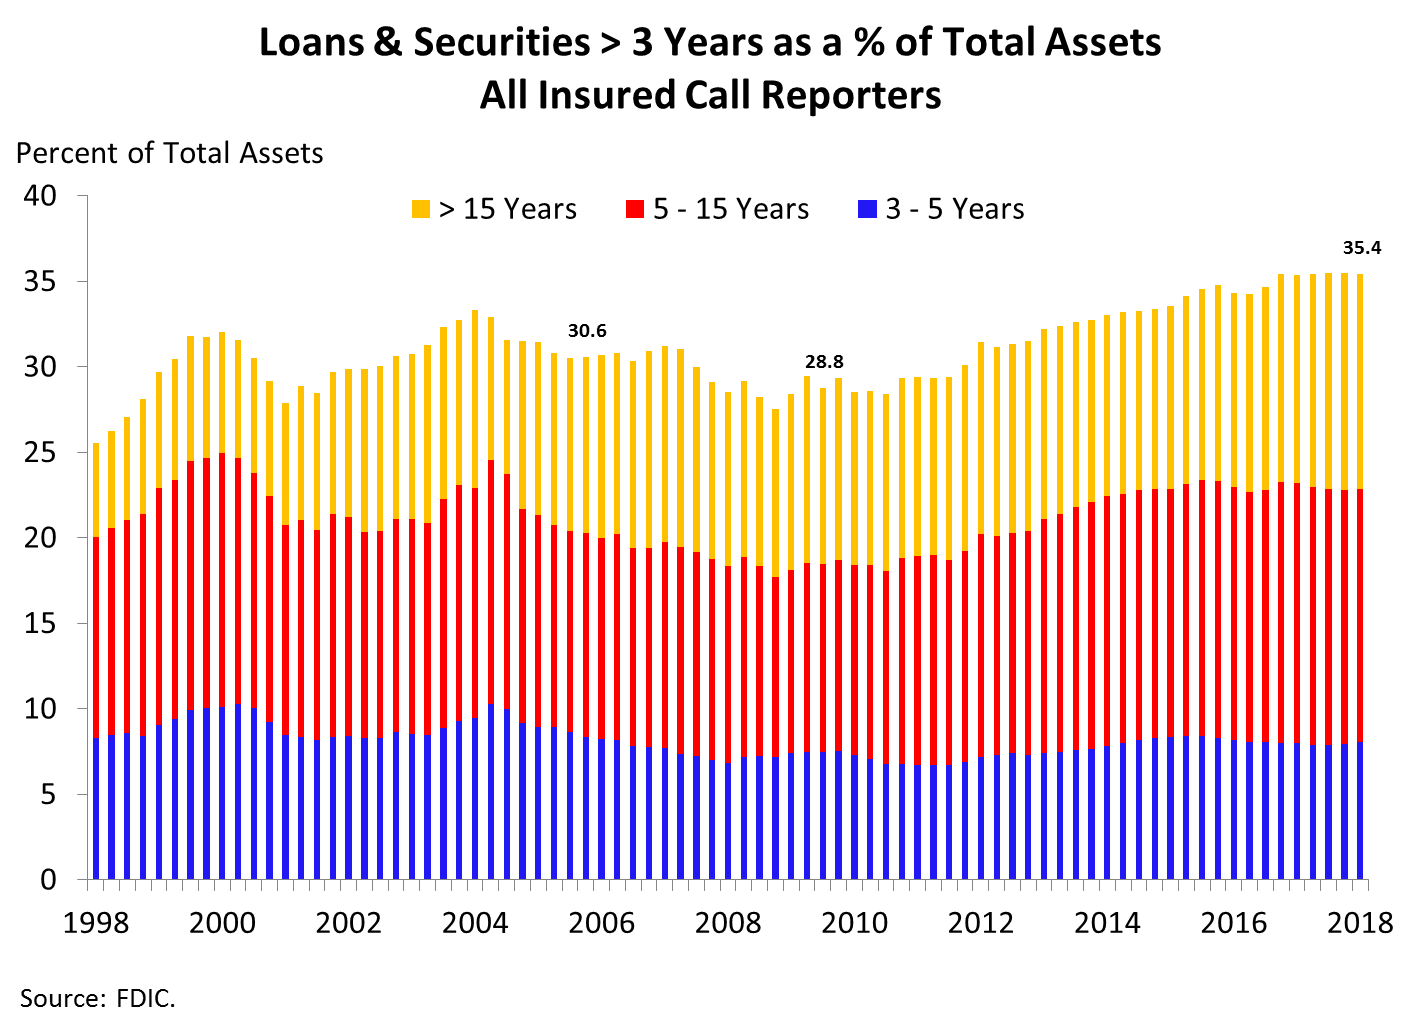 Chart 4: Loans & Securities > 3 Years as a % of Total Assets All Insured Call Reporters